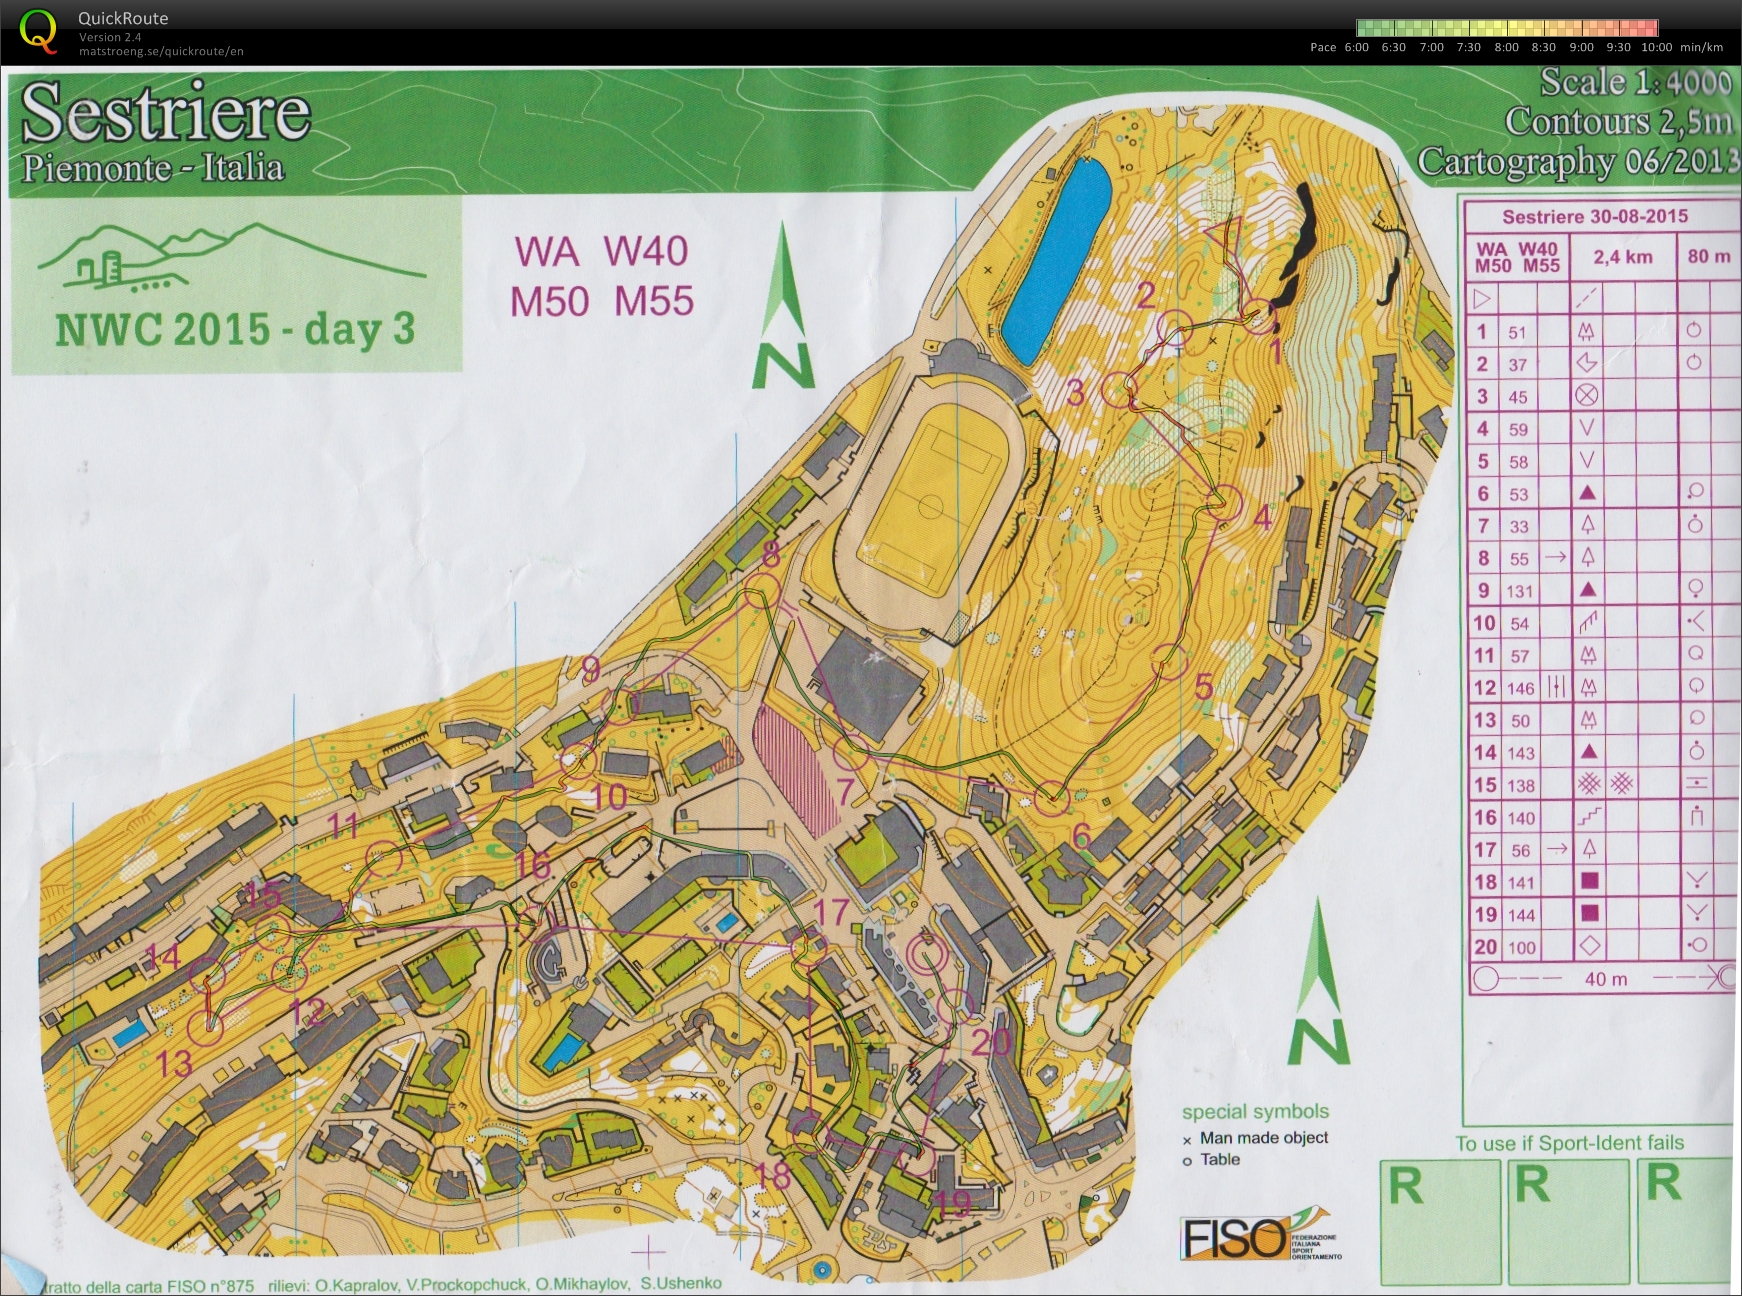 North west cup - Sestriere - Day 3 - M50 (30/08/2015)